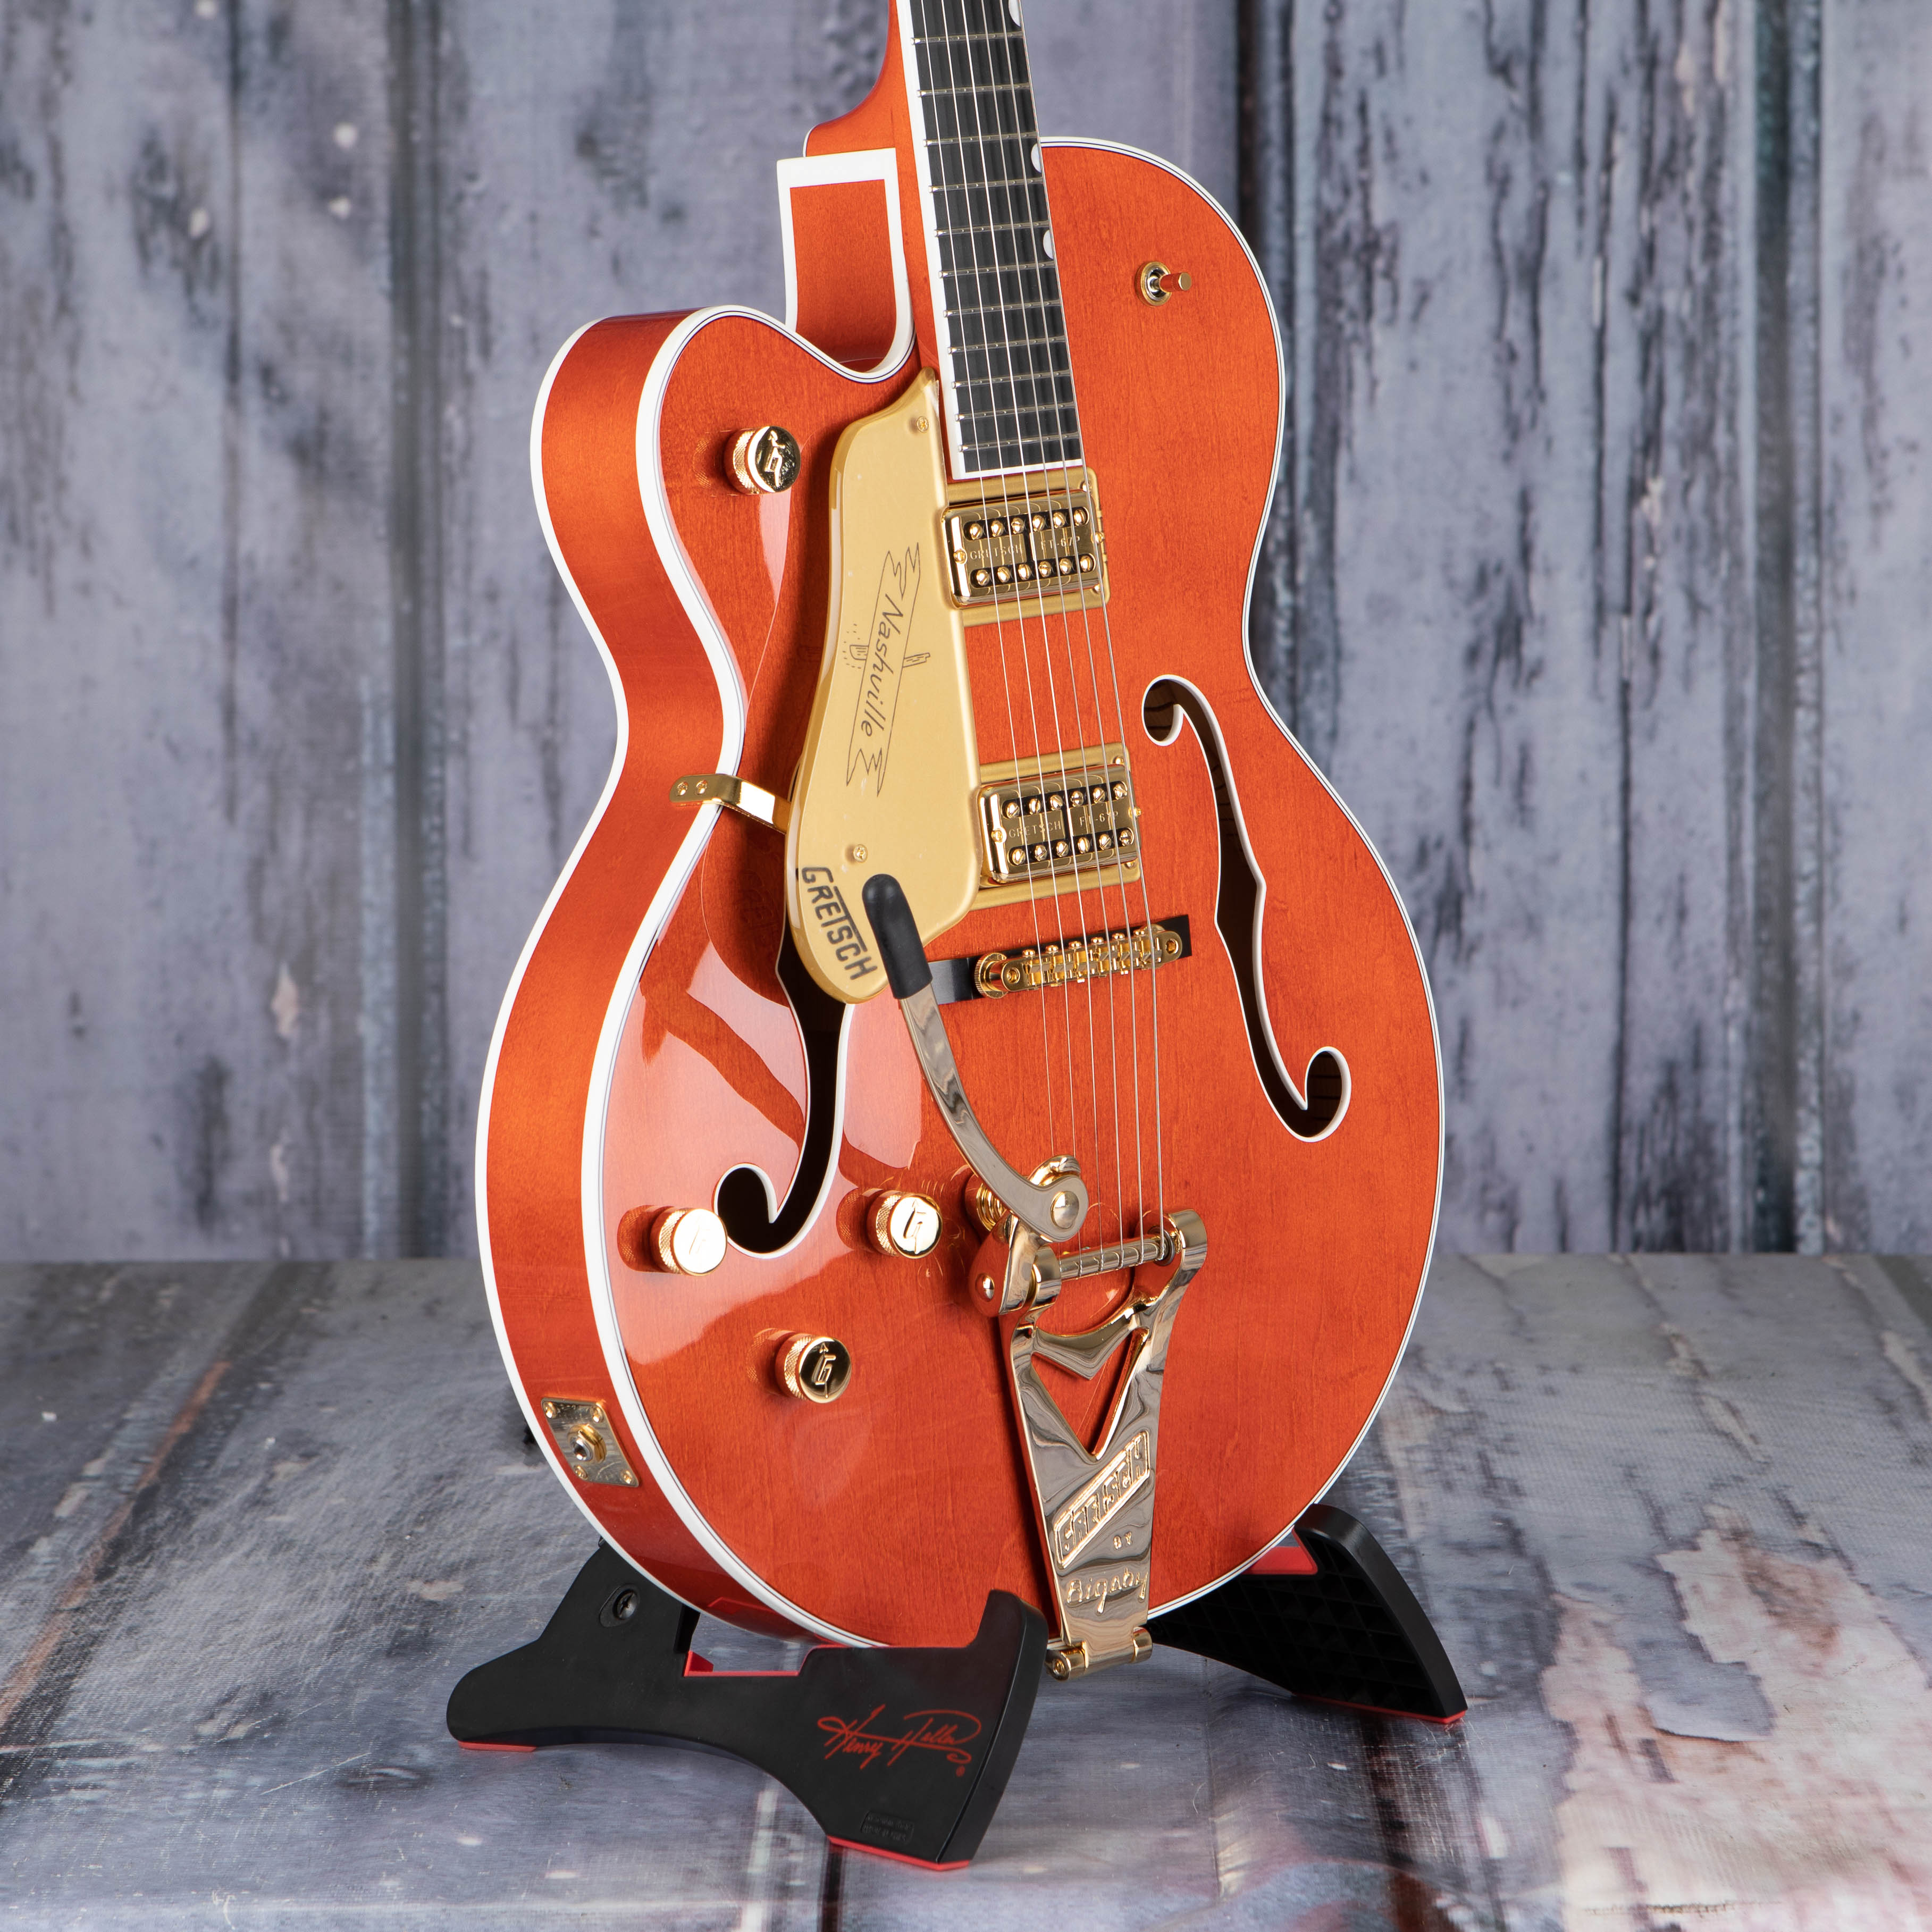 Gretsch G6120TG-LH Players Edition Nashville Hollowbody W/ String-Thru Bigsby And Gold Hardware Left-Handed Guitar, Orange Stain, angle